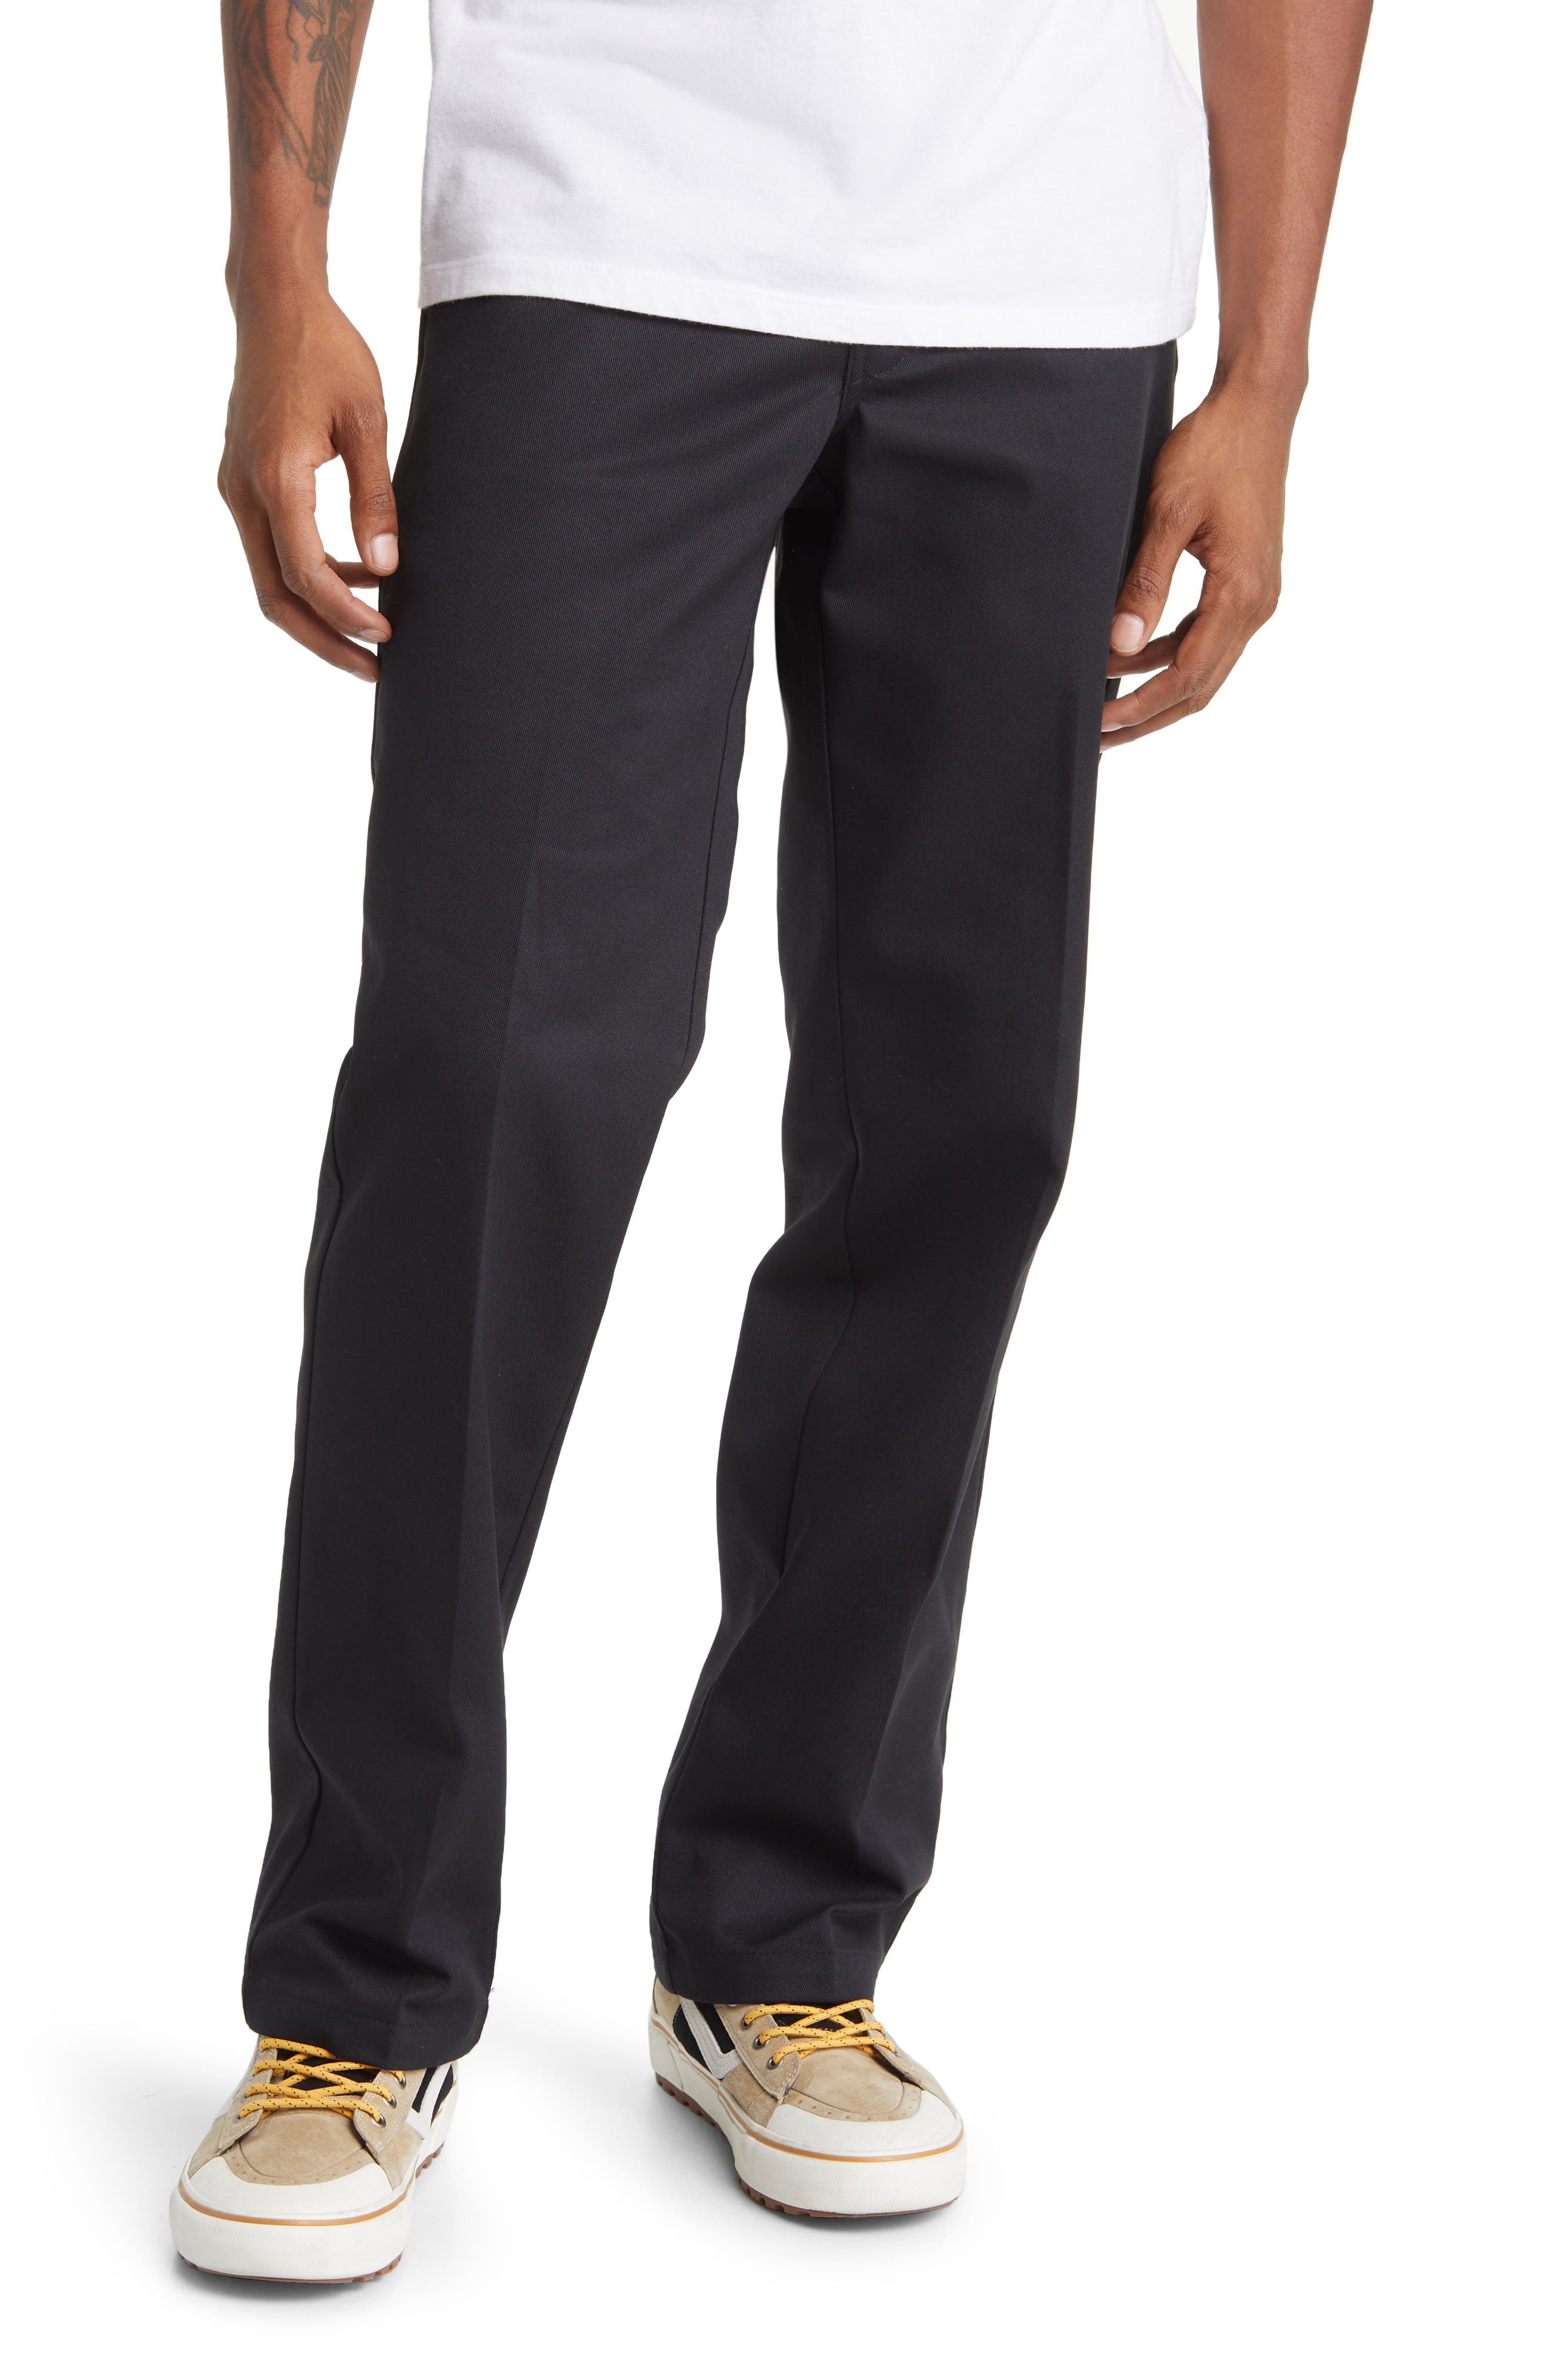 Men's Dickies View All: Clothing, Shoes & Accessories   Nordstrom